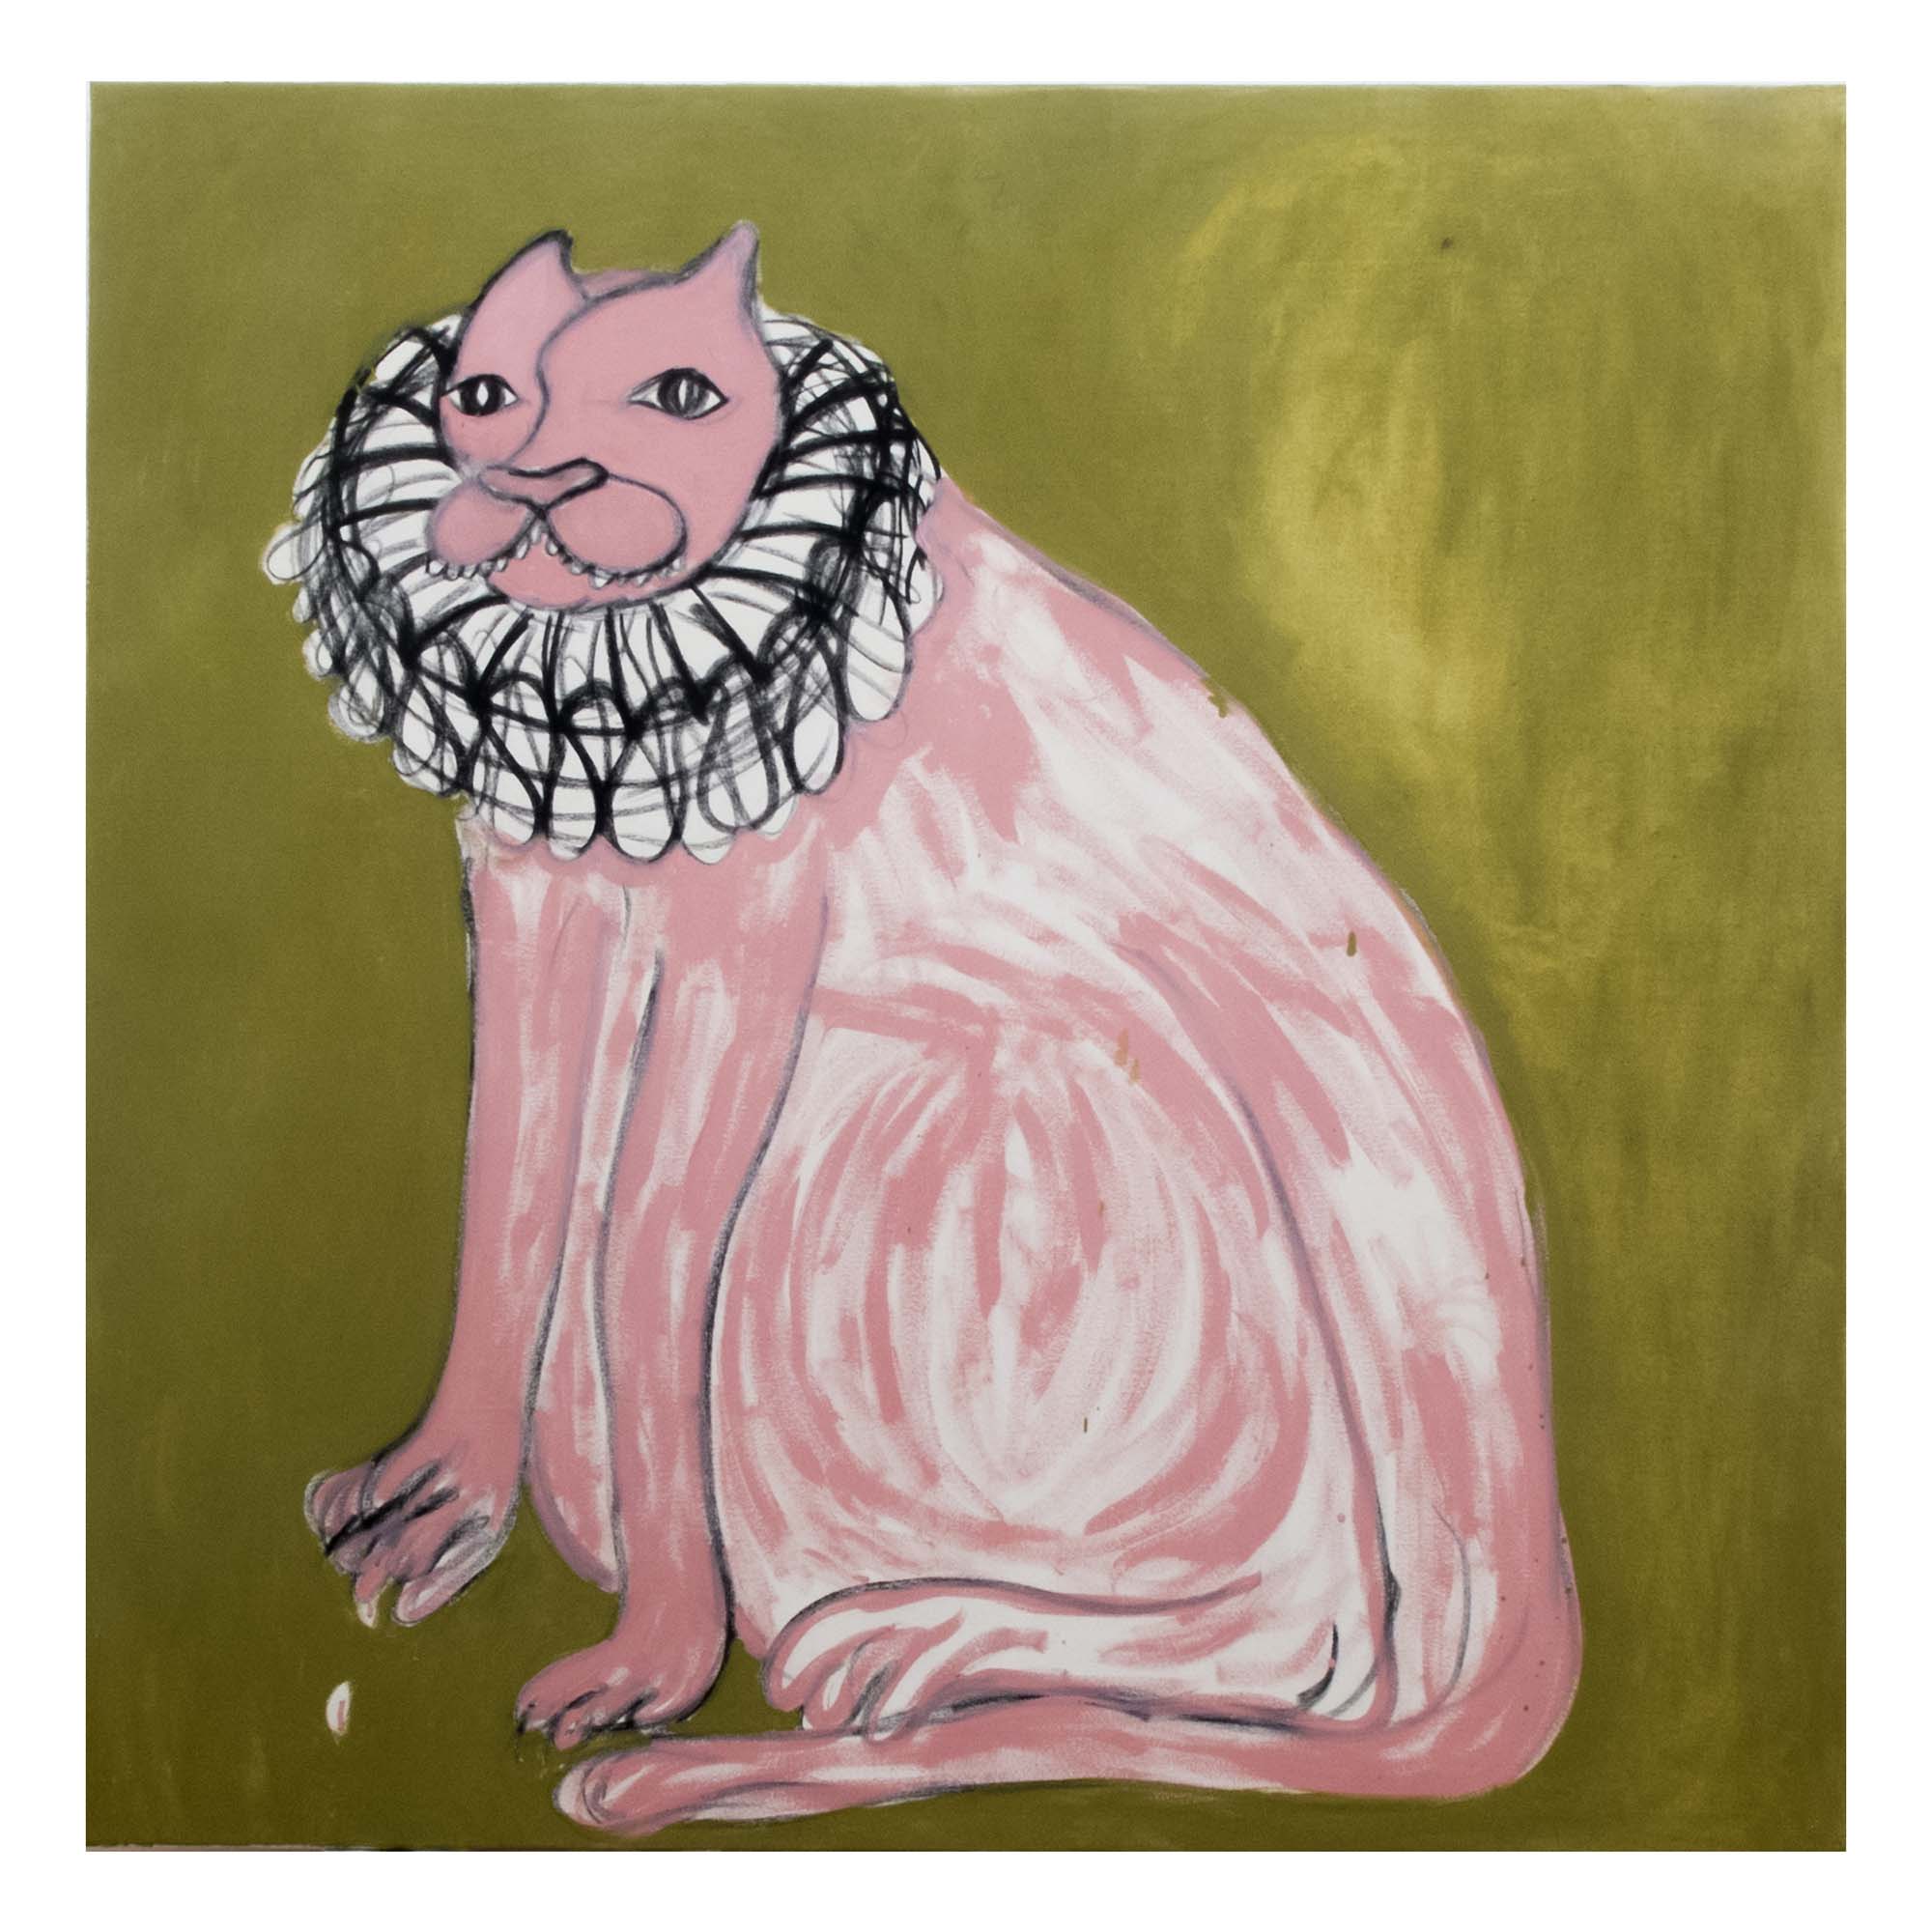 Sophie Vallance, 'King Botoño II' Oil and Charcoal on Canvas 130x130cm 2017